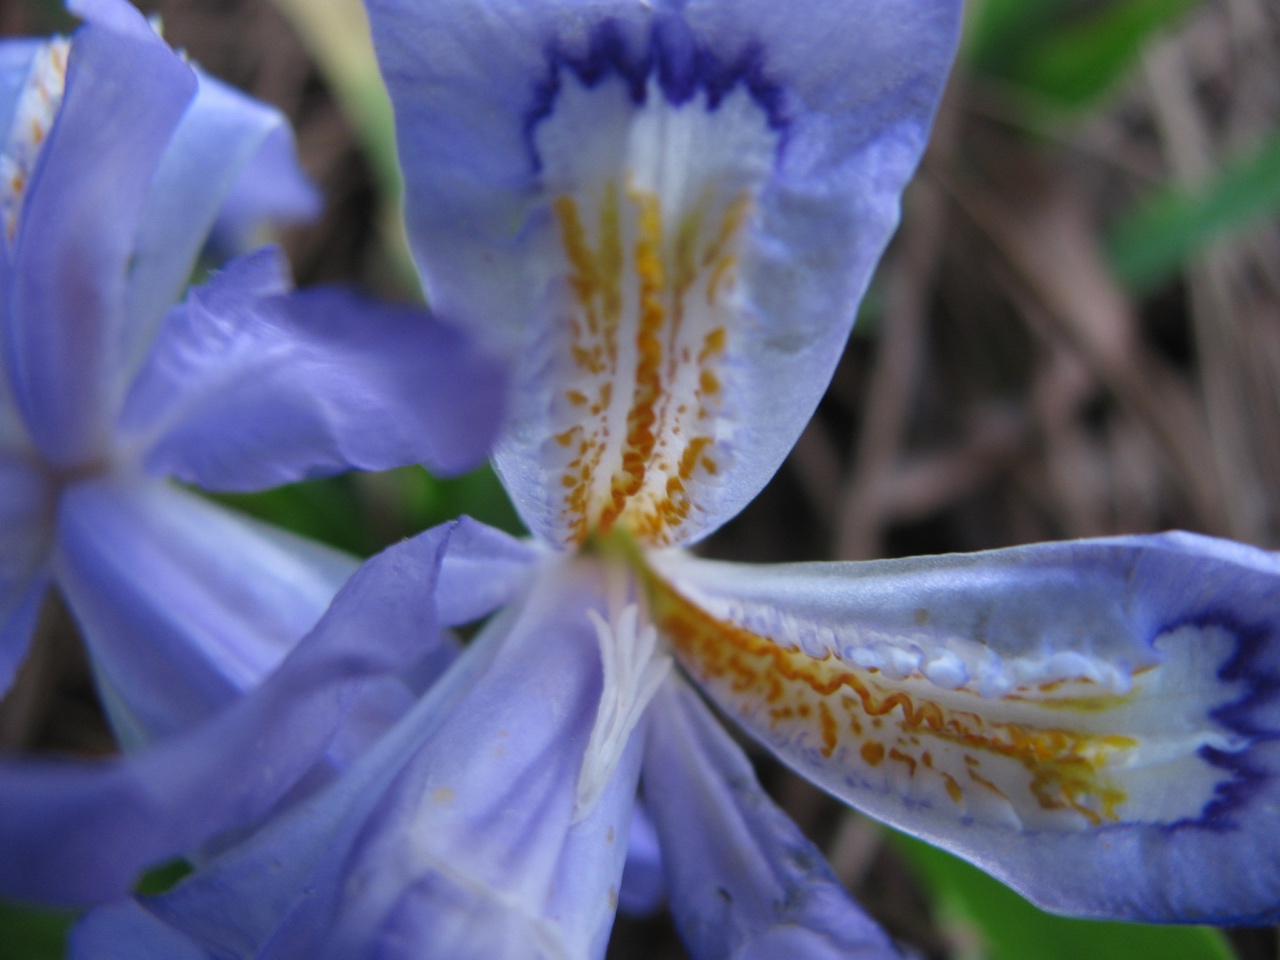 The Scientific Name is Iris cristata. You will likely hear them called Dwarf Crested Iris. This picture shows the Close-up of flower sepals showing the characteristic hairy yellow crest.  <em>Iris verna</em> also has a yellow band  but this band is much larger and  smooth.  of Iris cristata